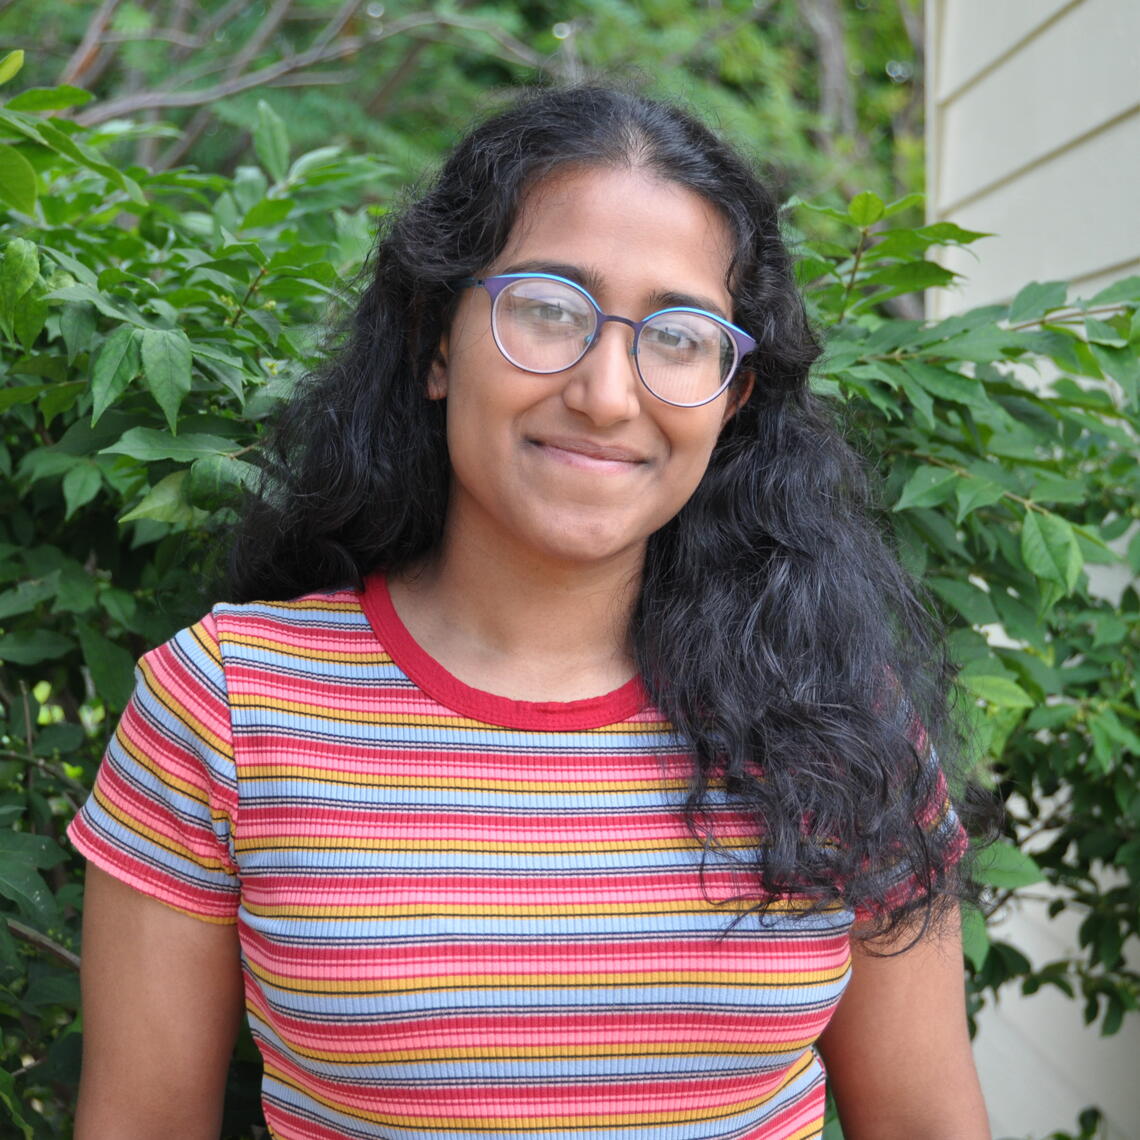 Tarini Fernando smiles outside in front of a bush. She is wearing a striped t-shirt and glasses.